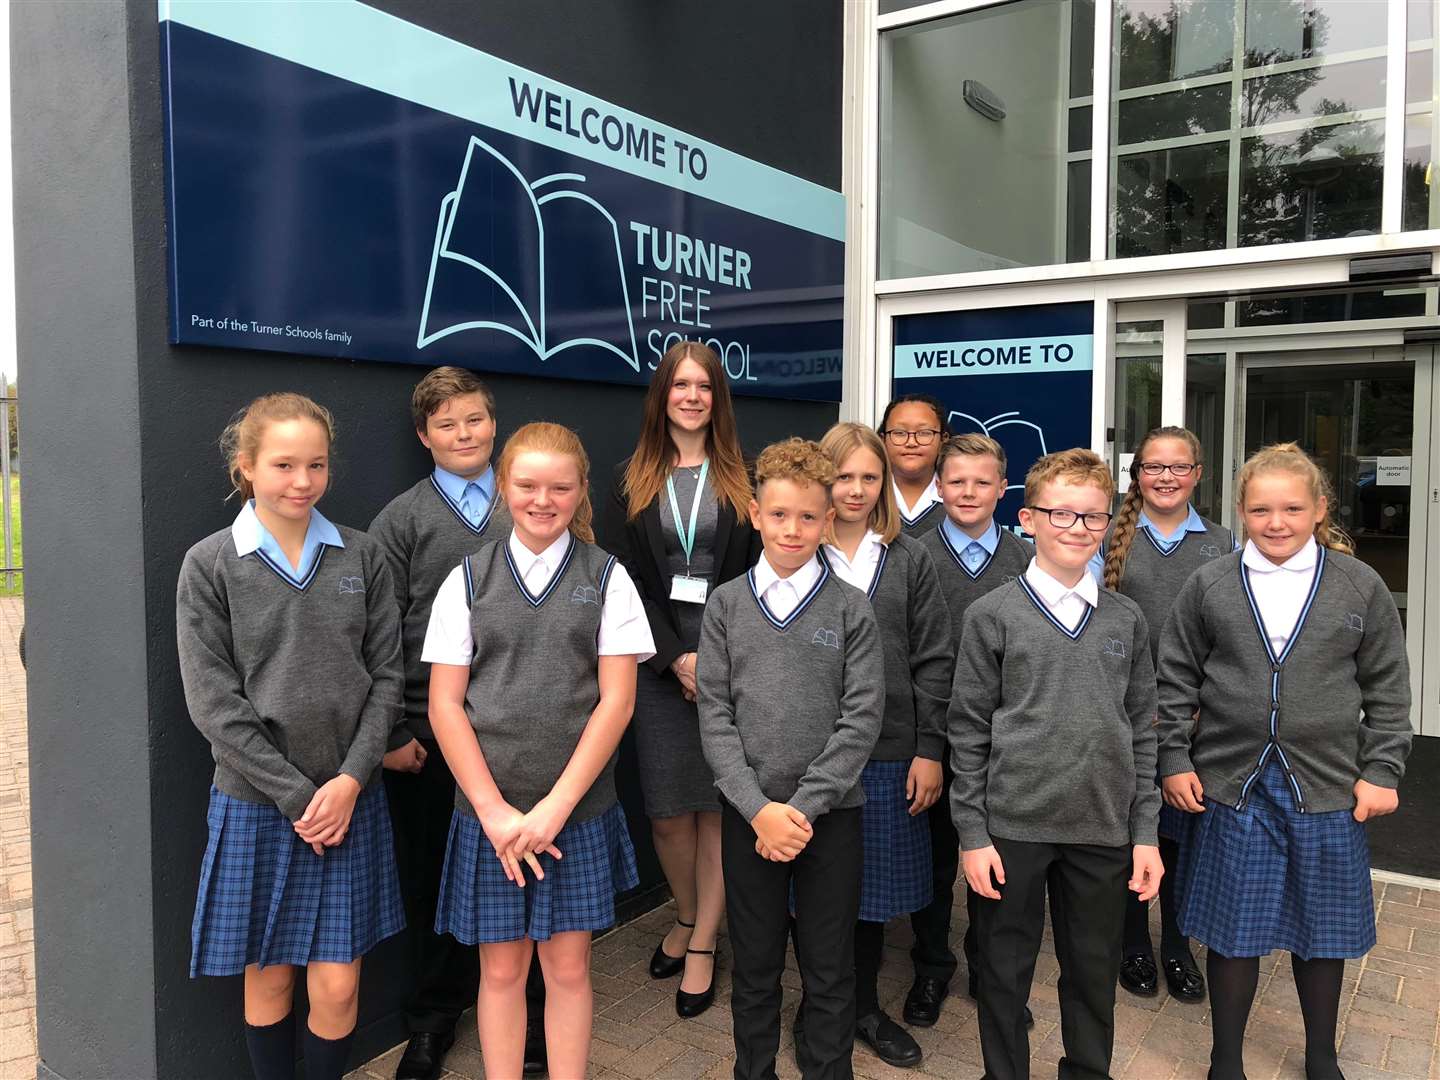 Some of the first ever pupils at Turner Free school with their new head teacher